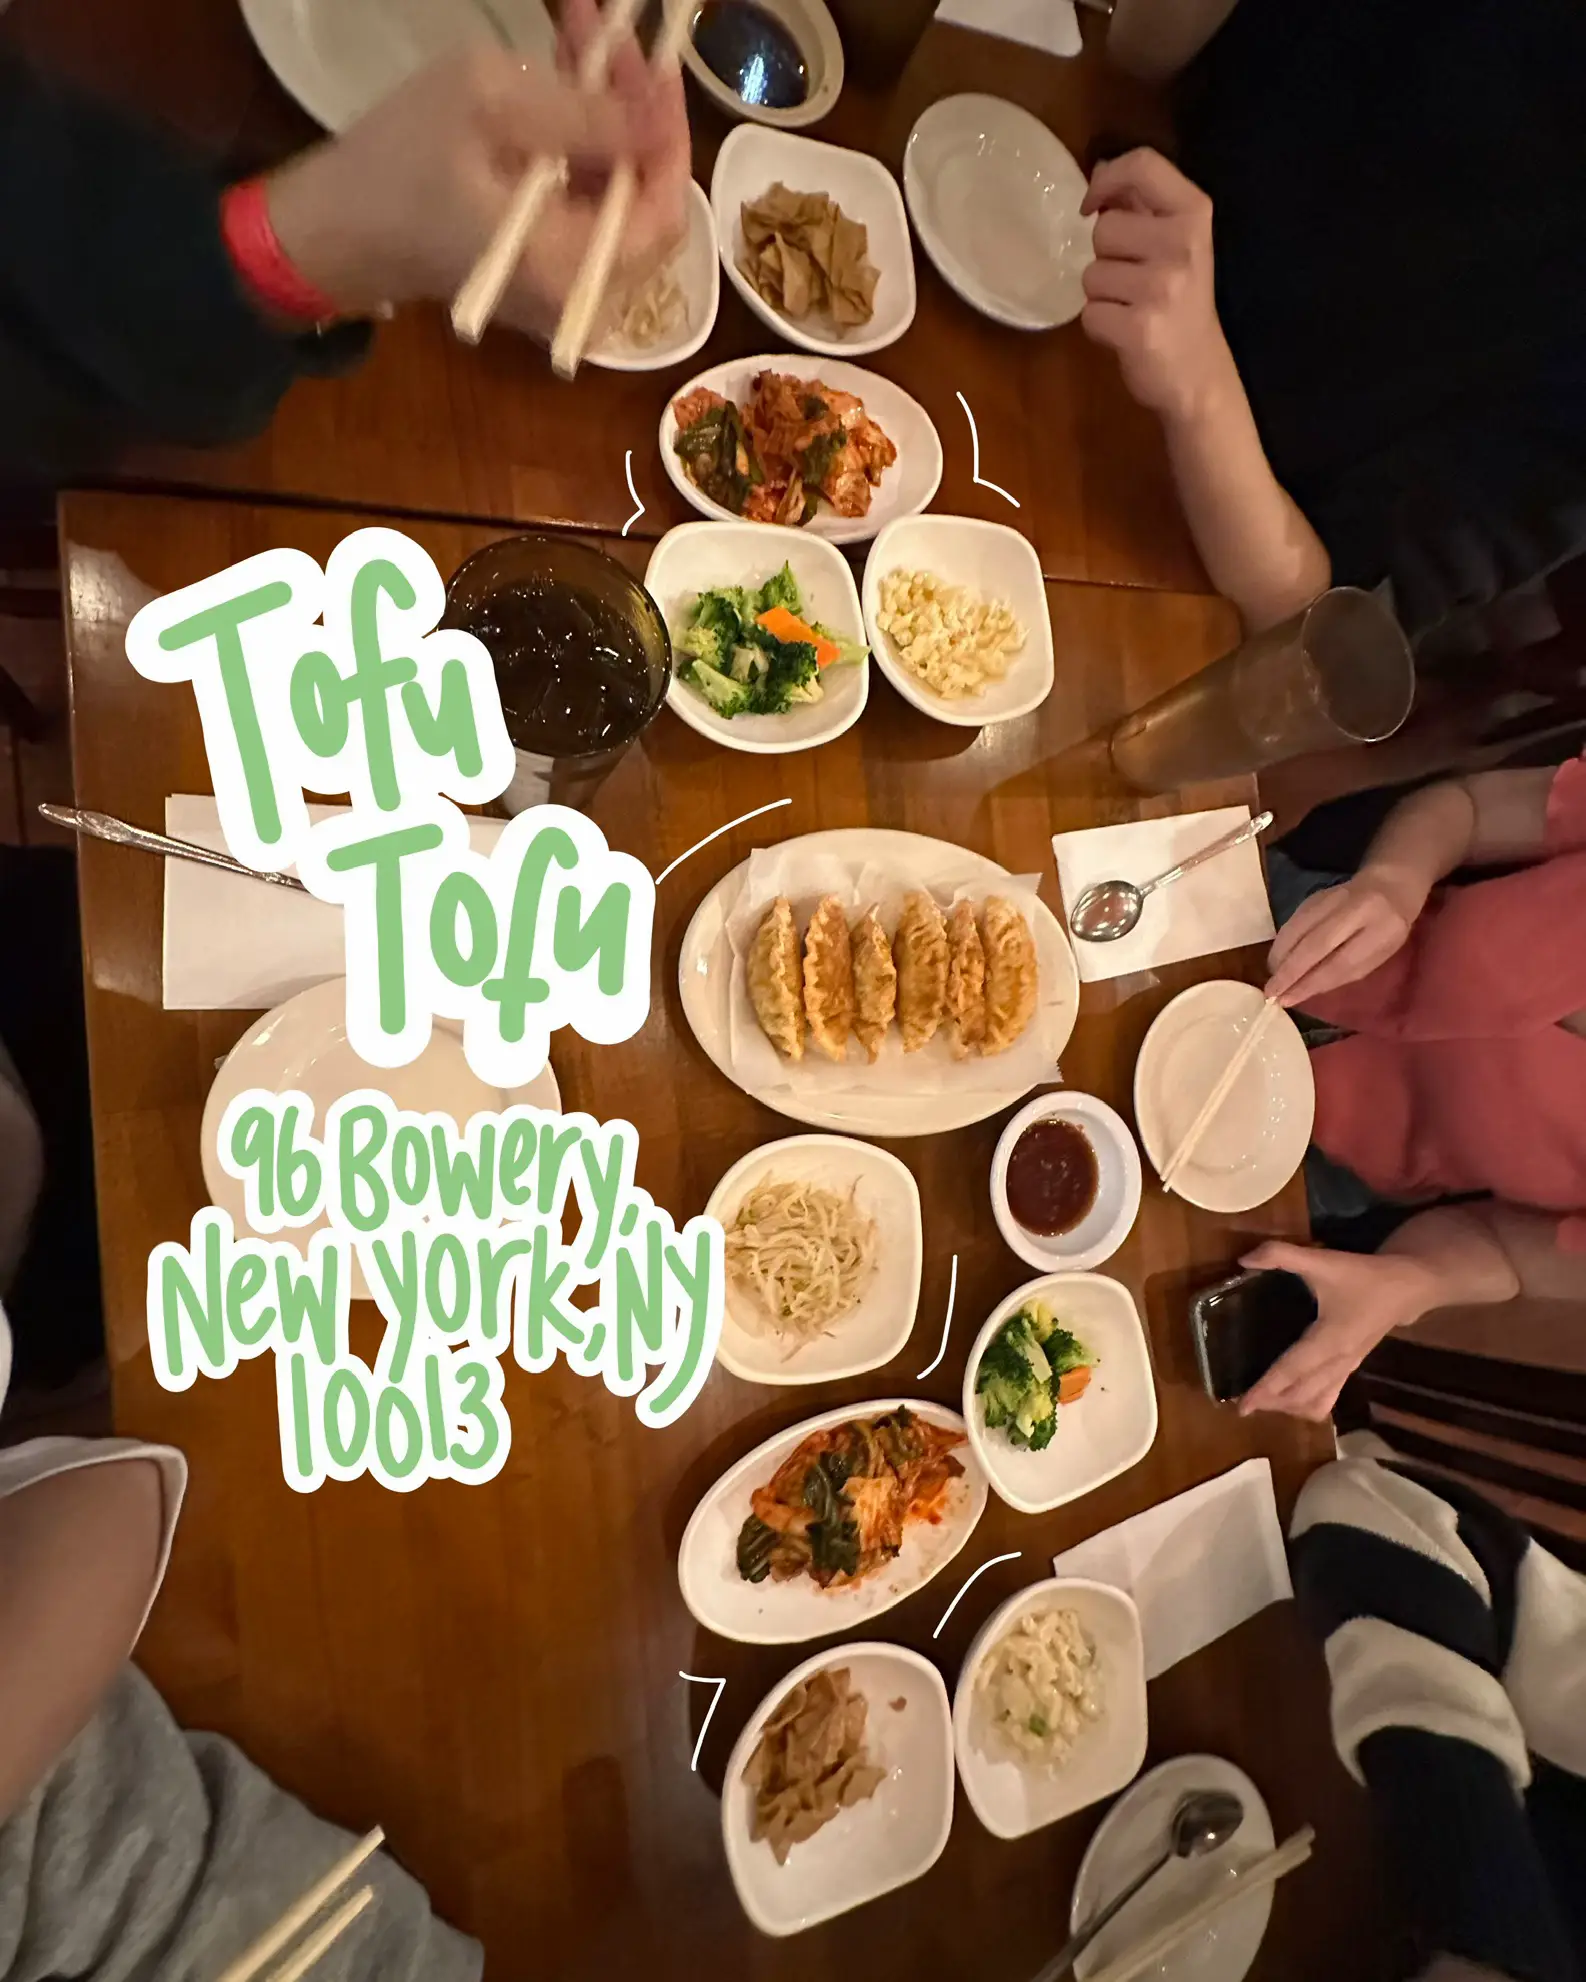  A group of people are sitting at a table with plates of food.